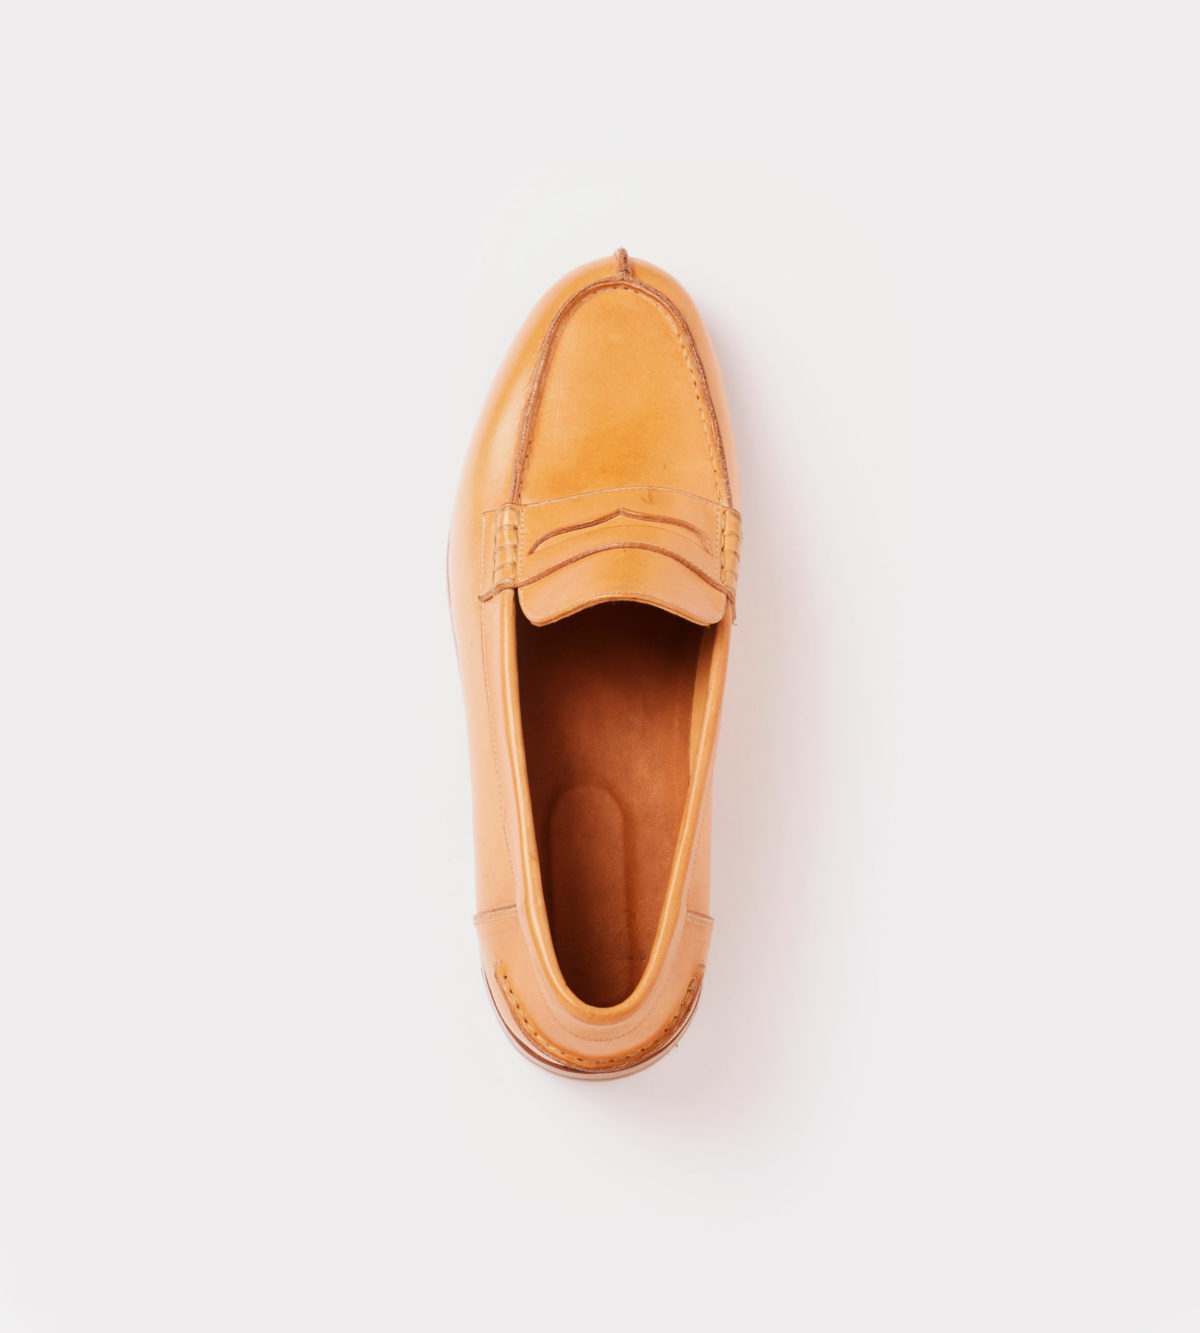 Hand made moccasin in natural leather - front